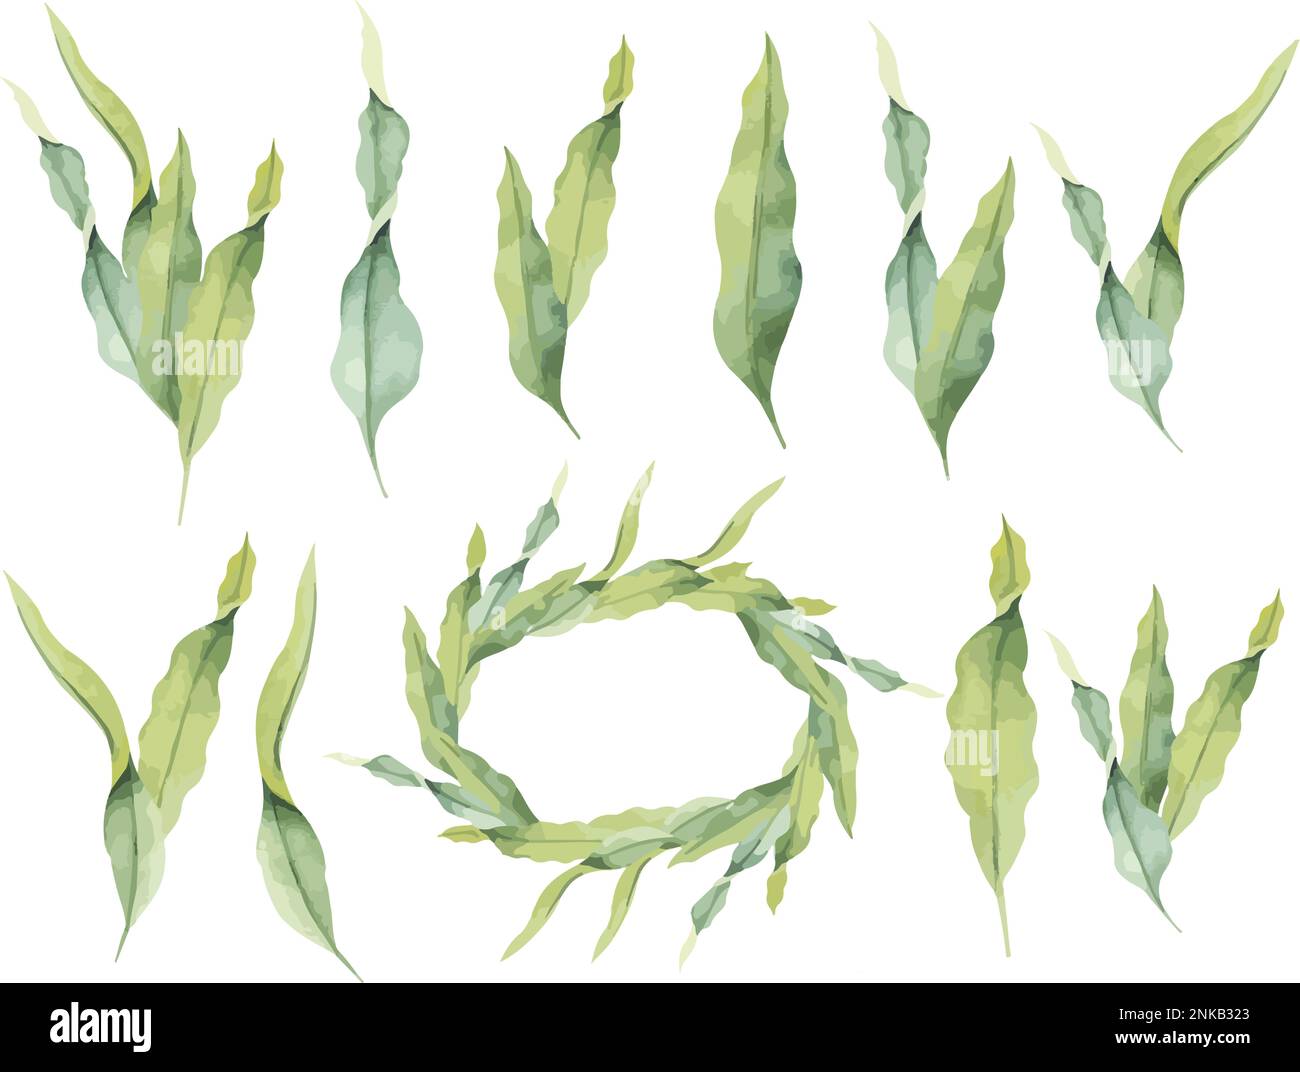 Vector laminaria. Hand painted underwater kelp floral illustration with algae leaves branch in watercolor style Stock Vector